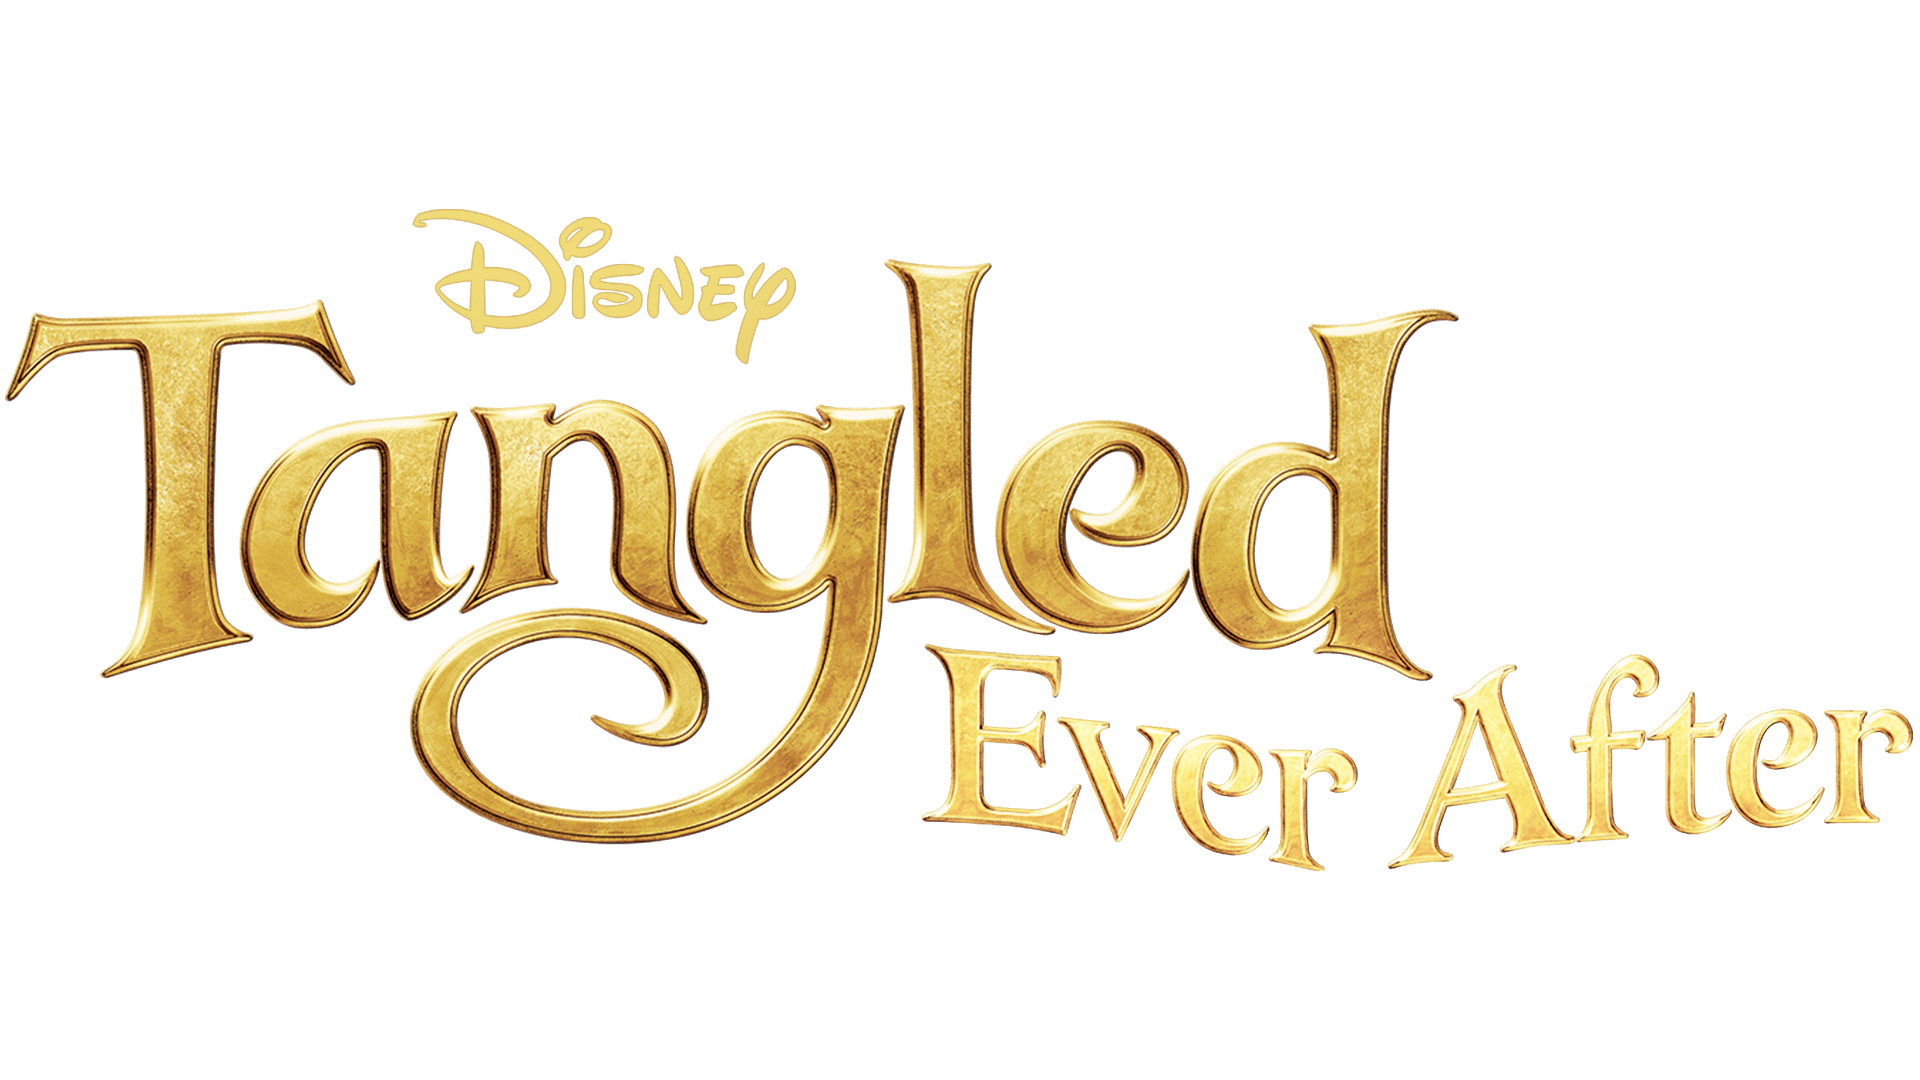 tangled ever after